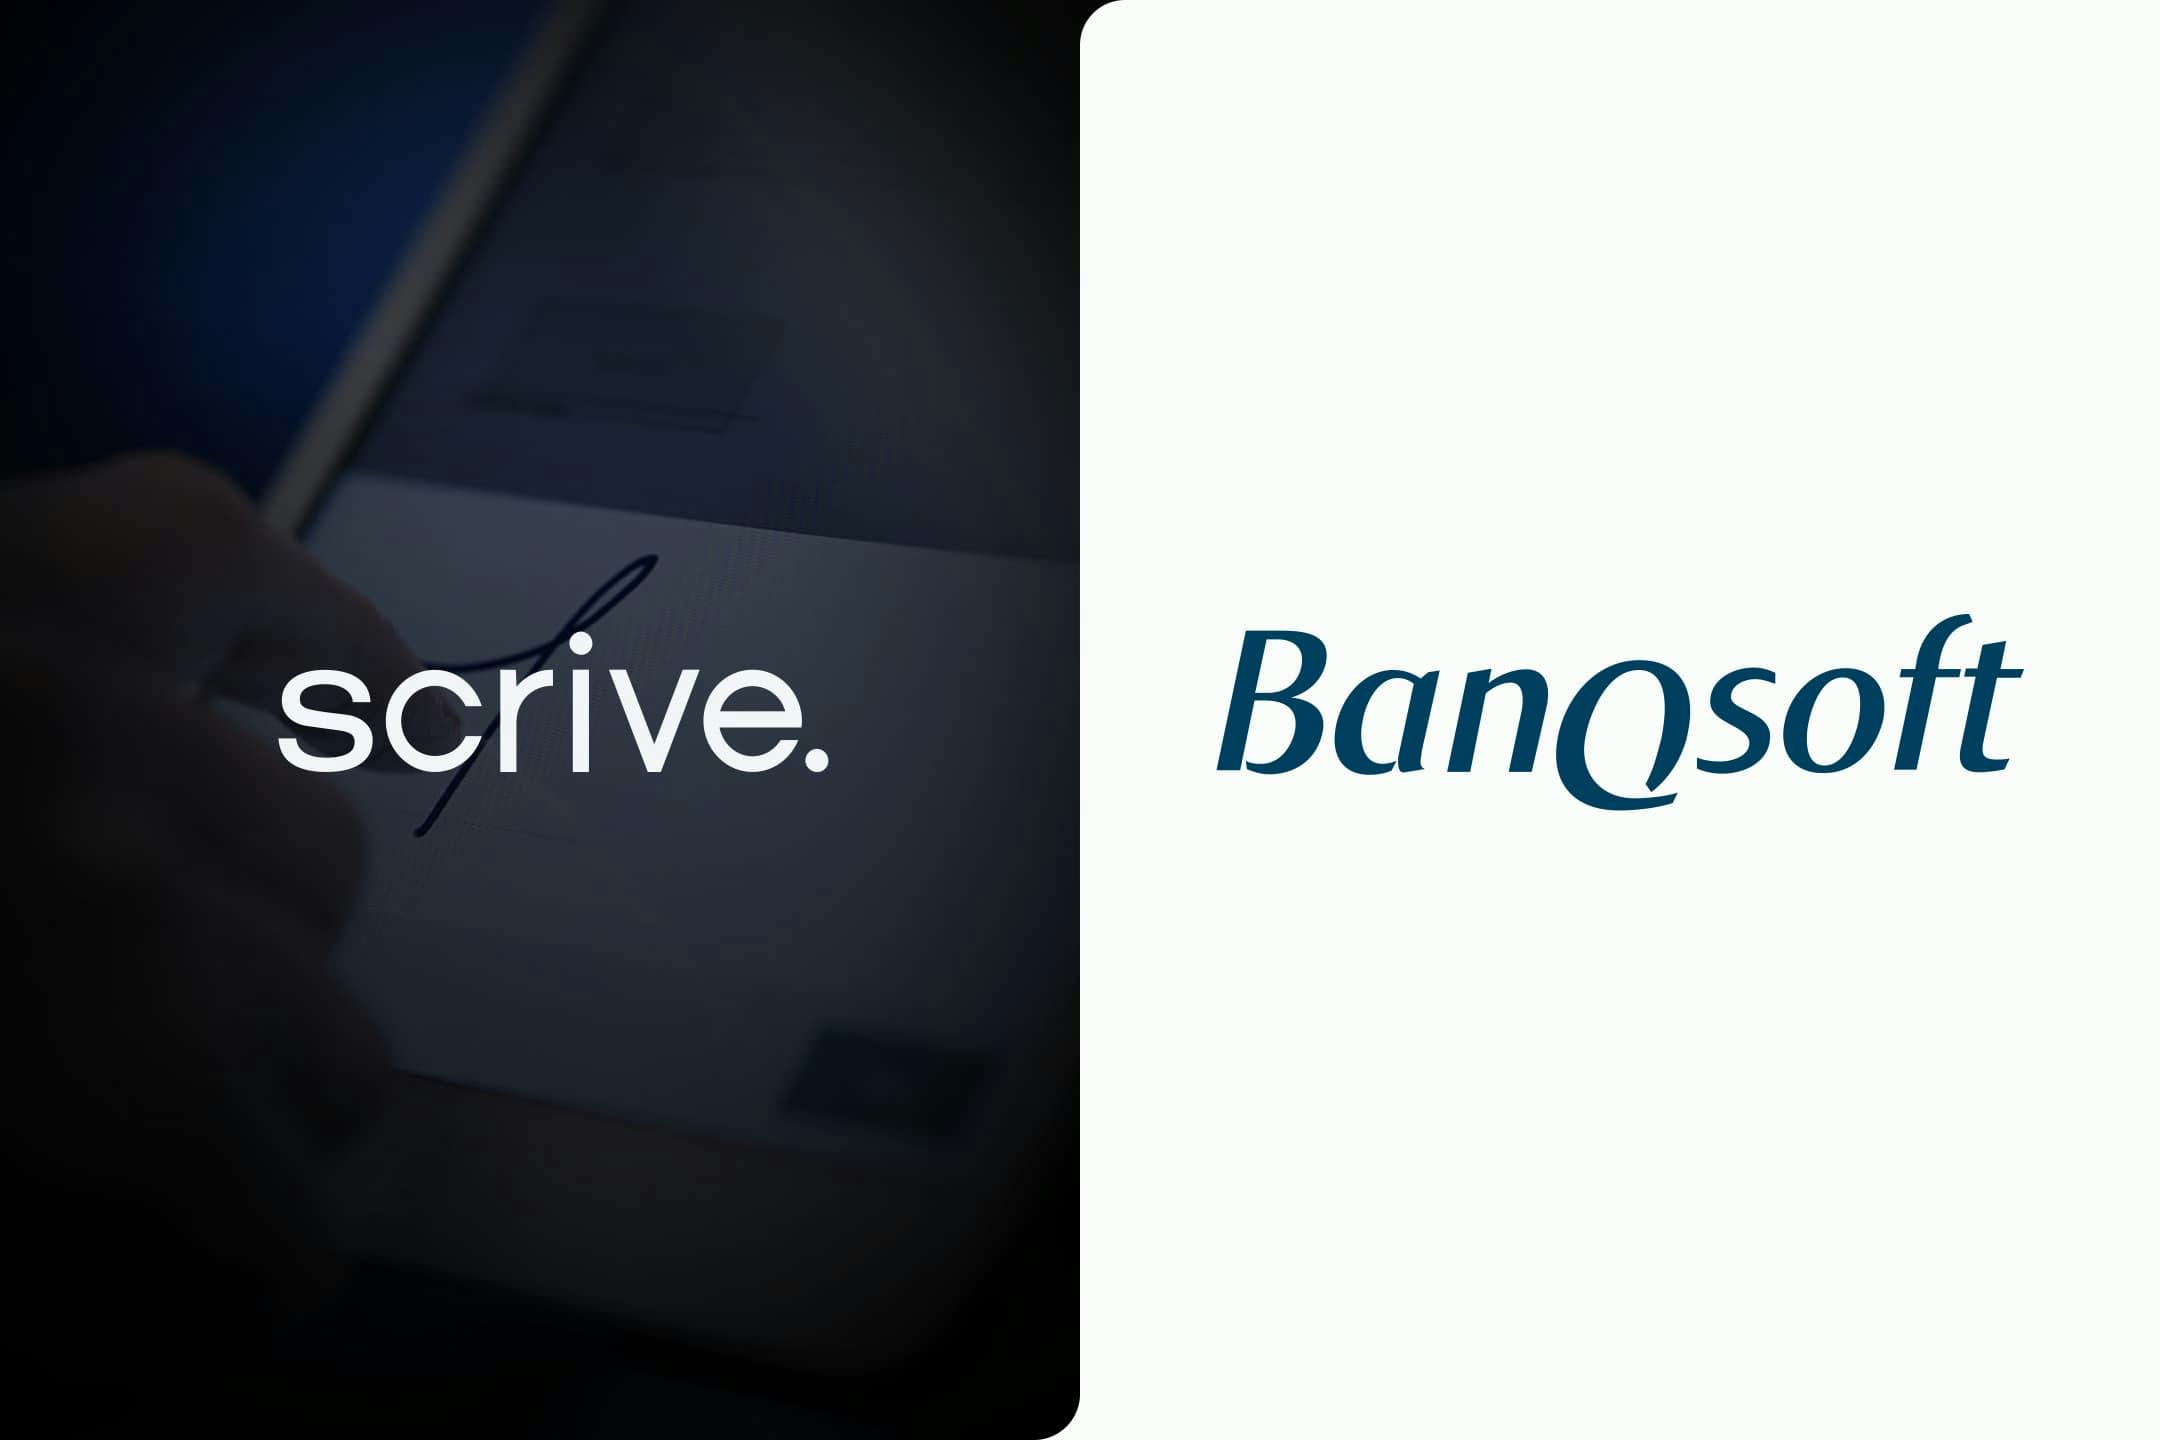 Banqsoft partners with Scrive